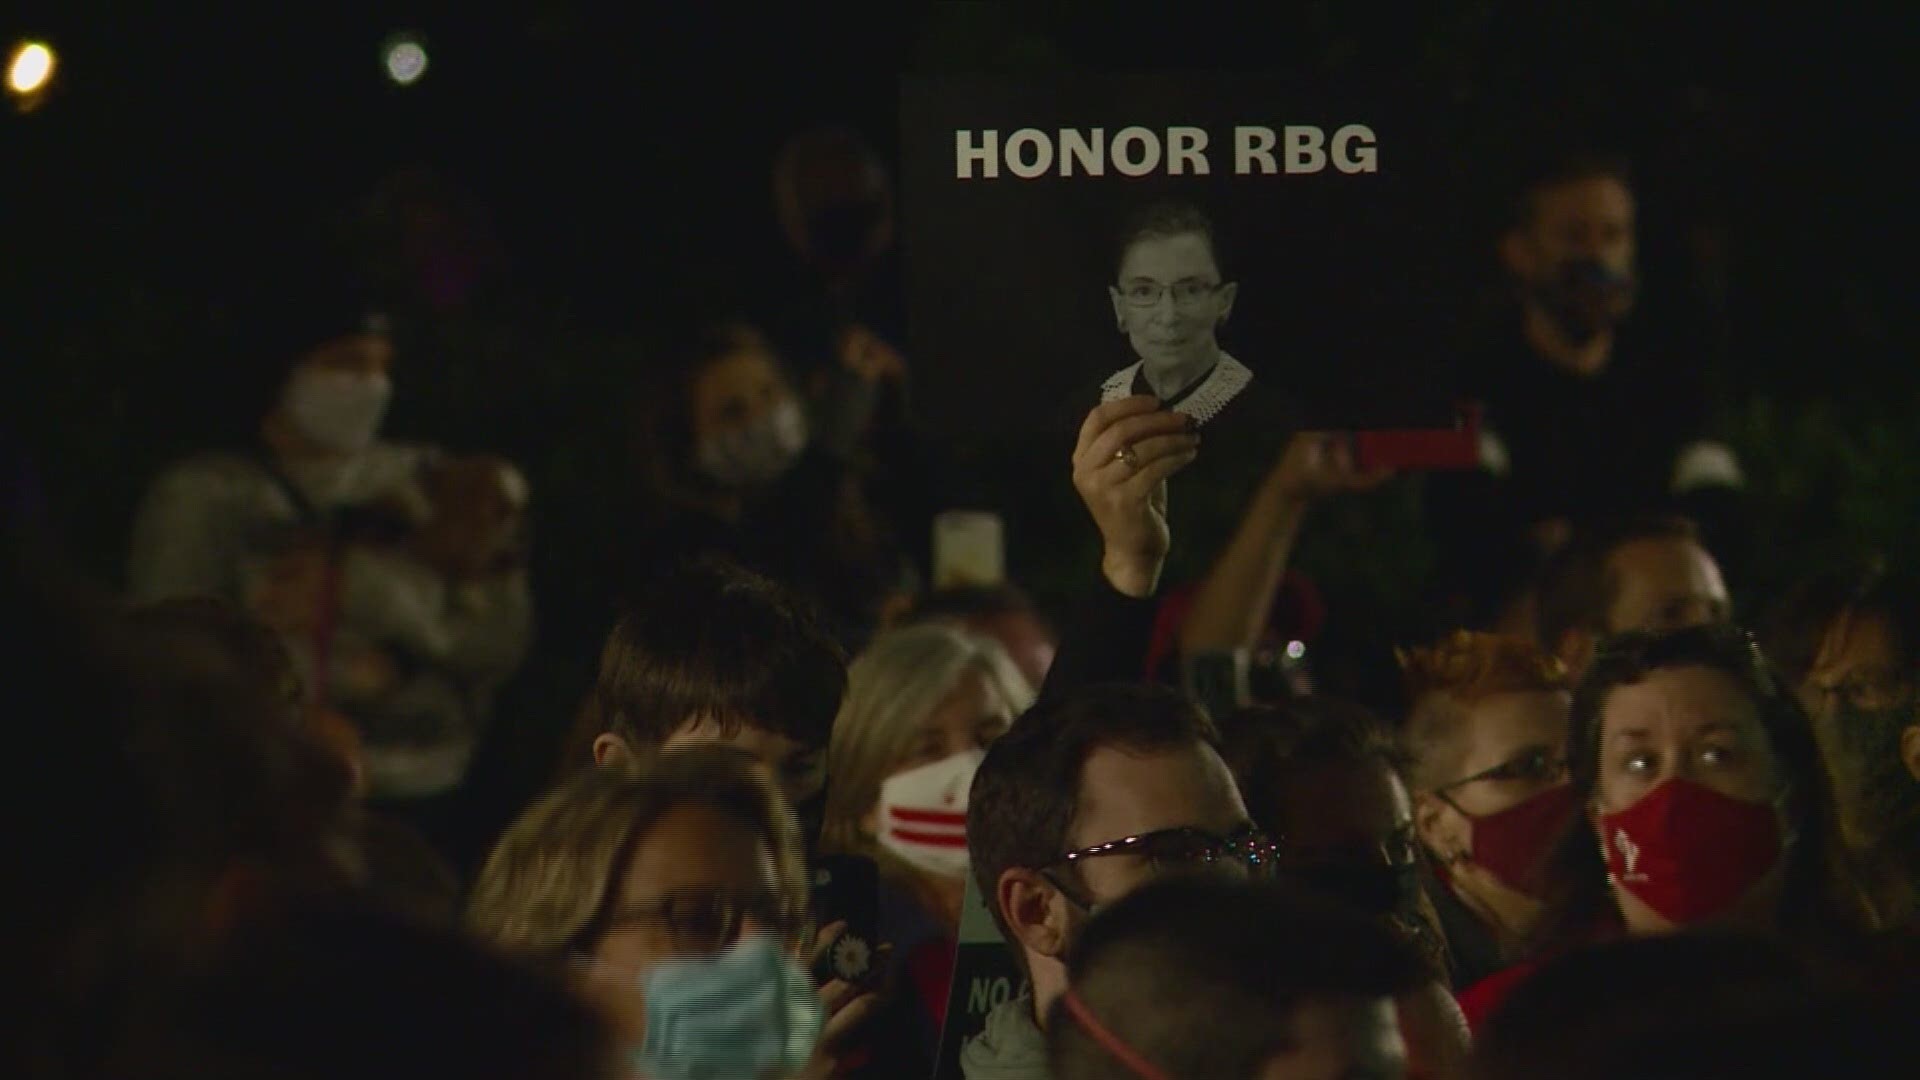 Hundreds gathered in Washington late Saturday to pay respects to deceased Supreme Court Justice Ruth Bader Ginsburg.